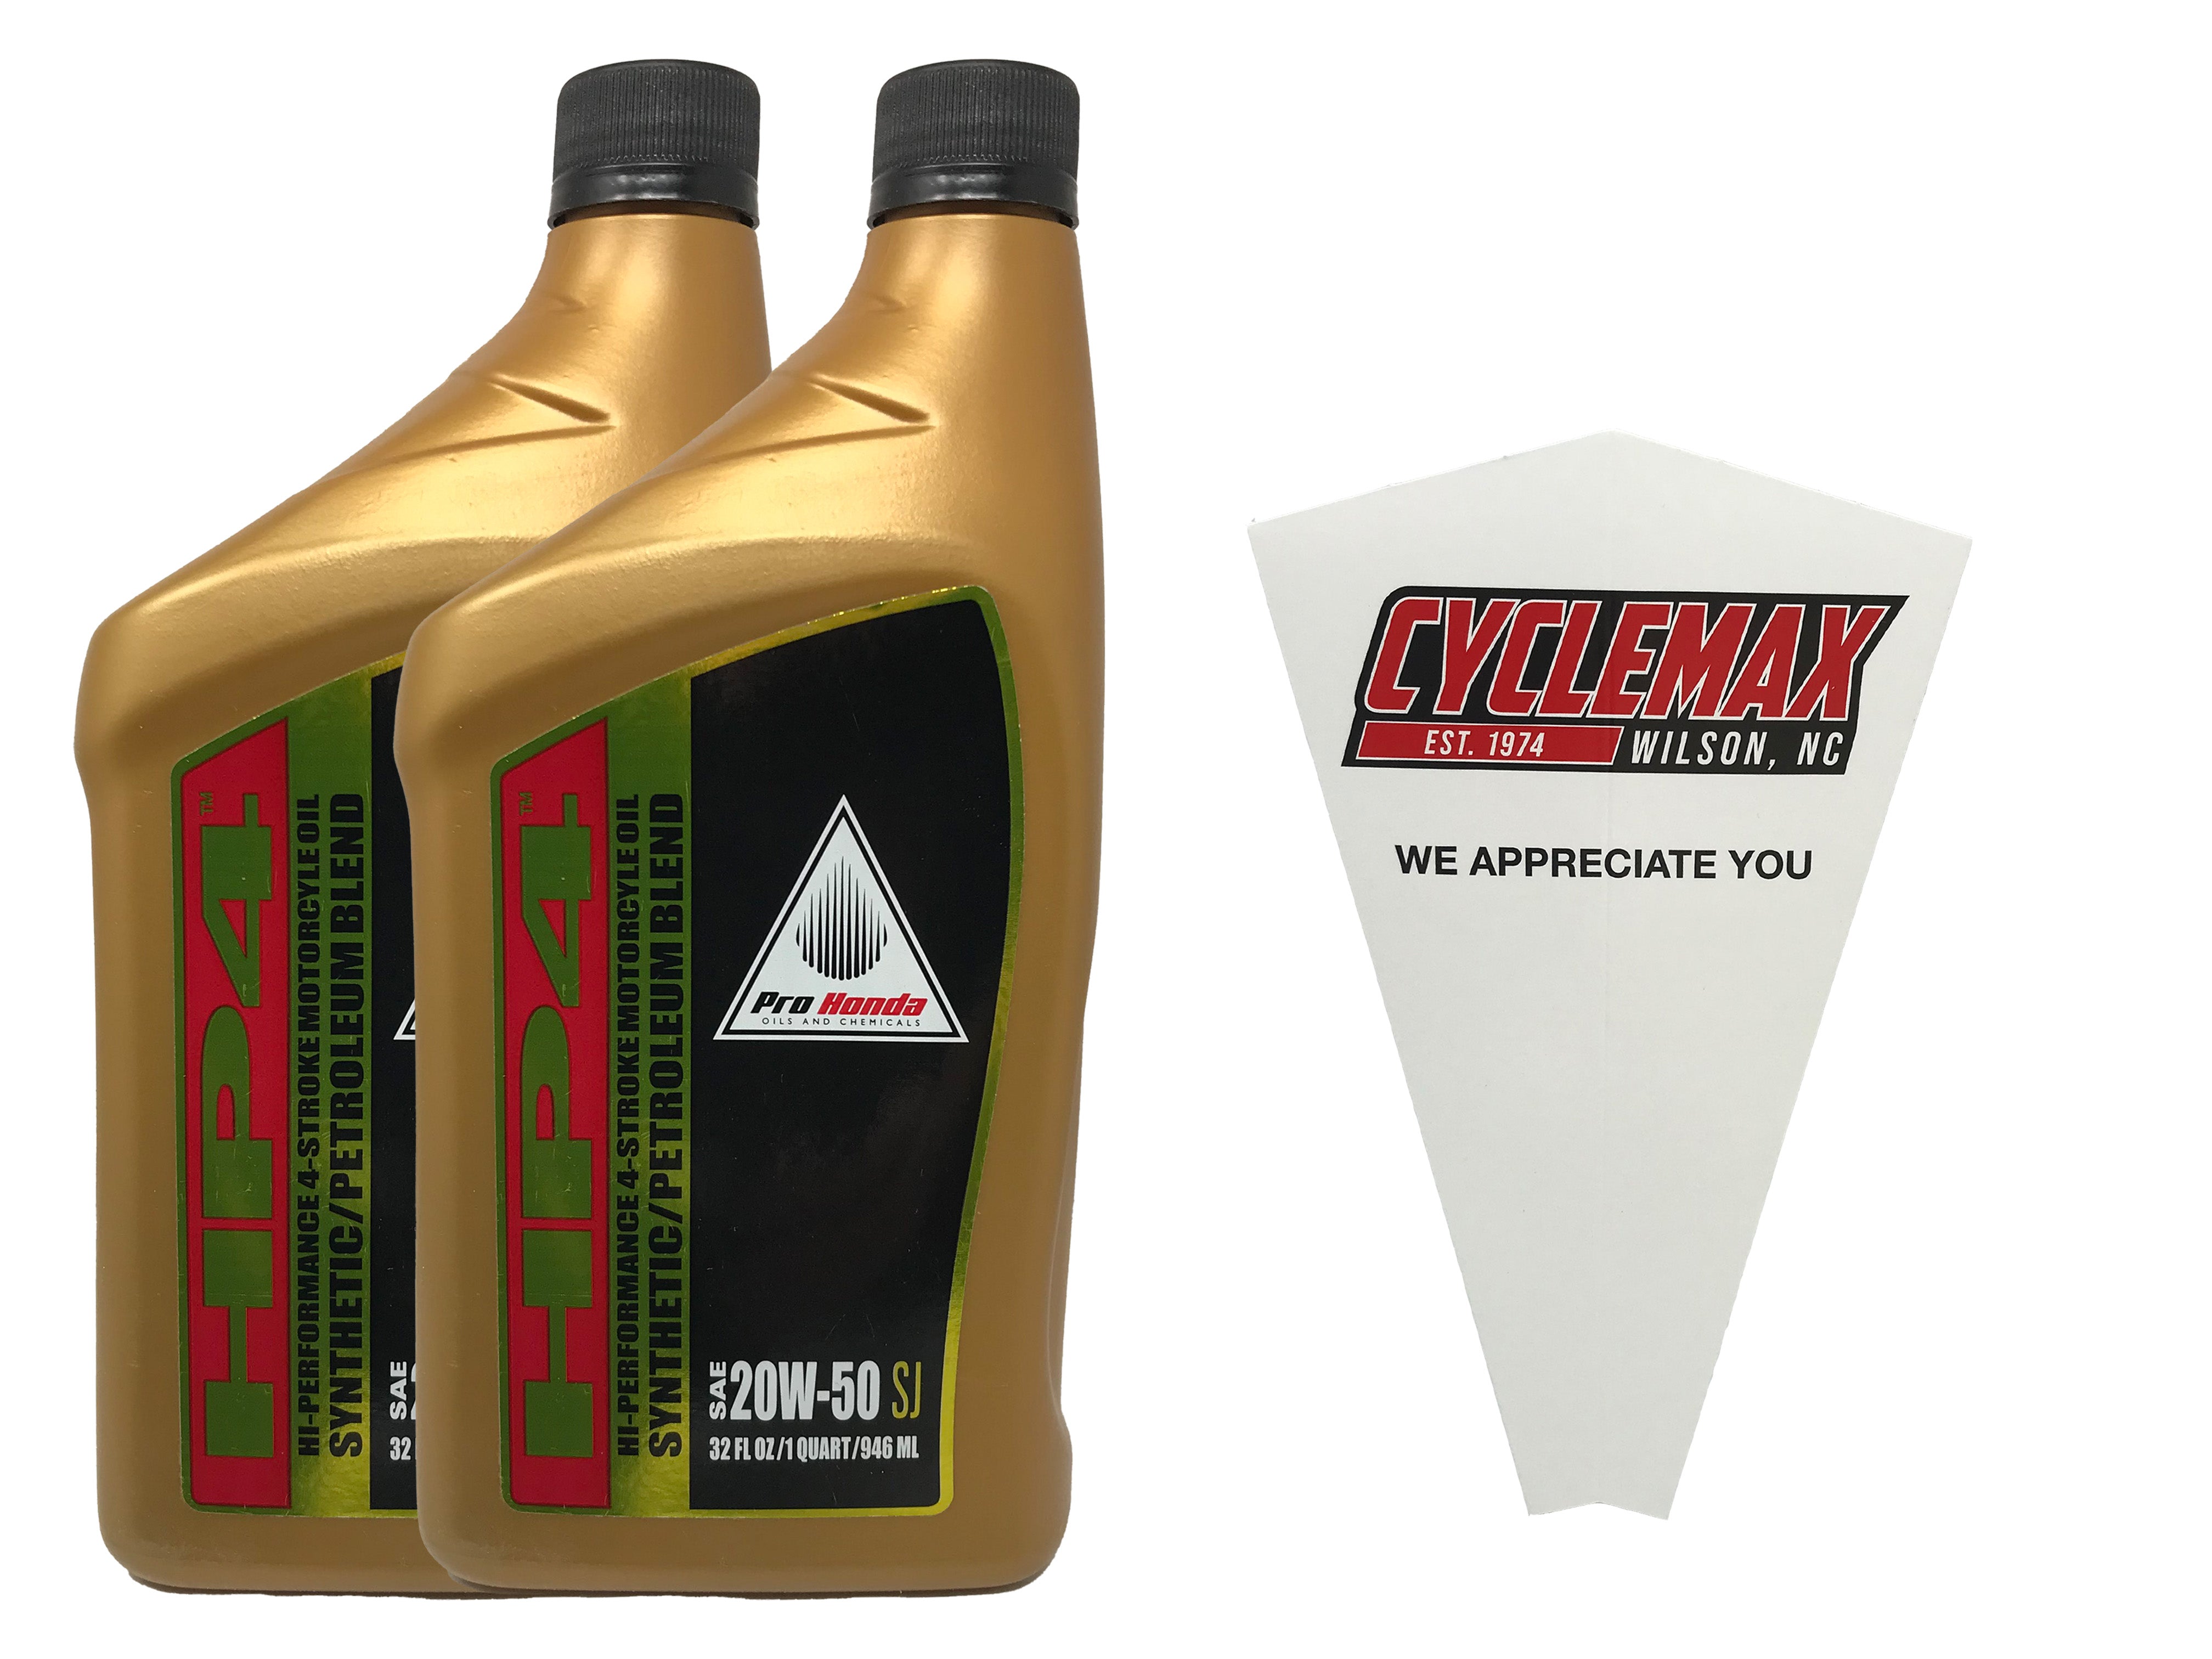 Cyclemax Two Pack for Honda HP4 20W-50 Semi Synthetic Oil Blend 08C35-A25W0M Contains Two Quarts and a Funnel